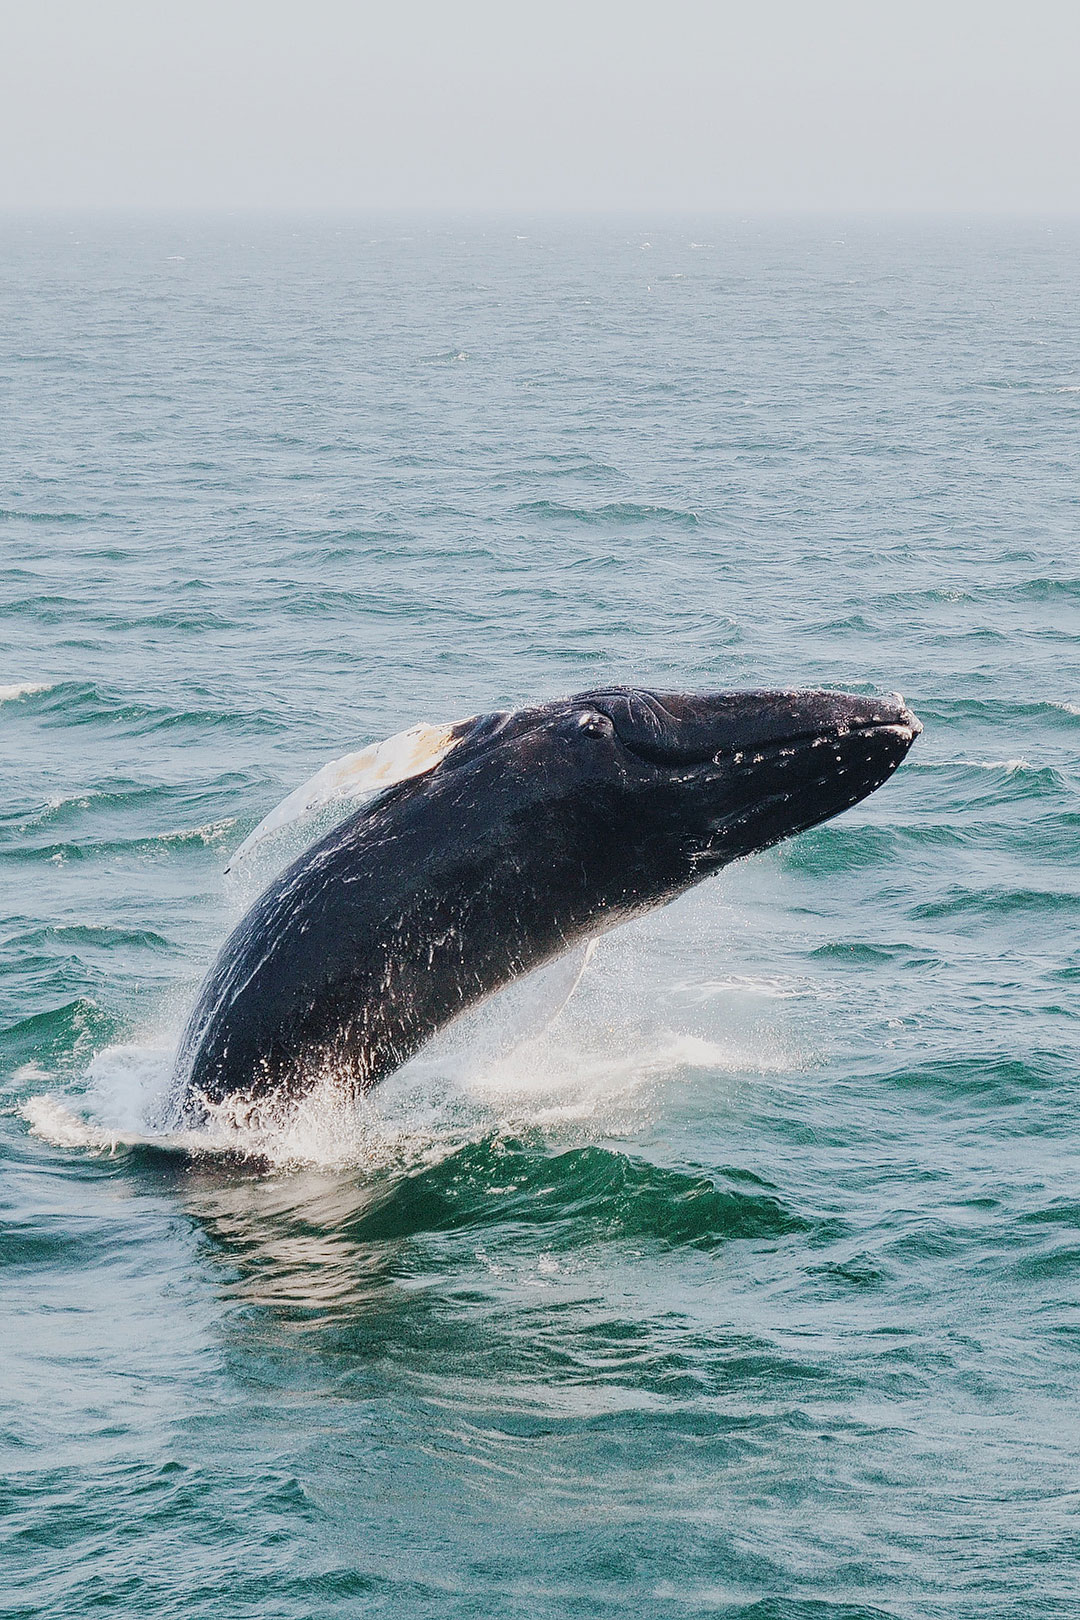 Bar Harbor Whale Watch + Best Time for Whale Watching + Other Tips